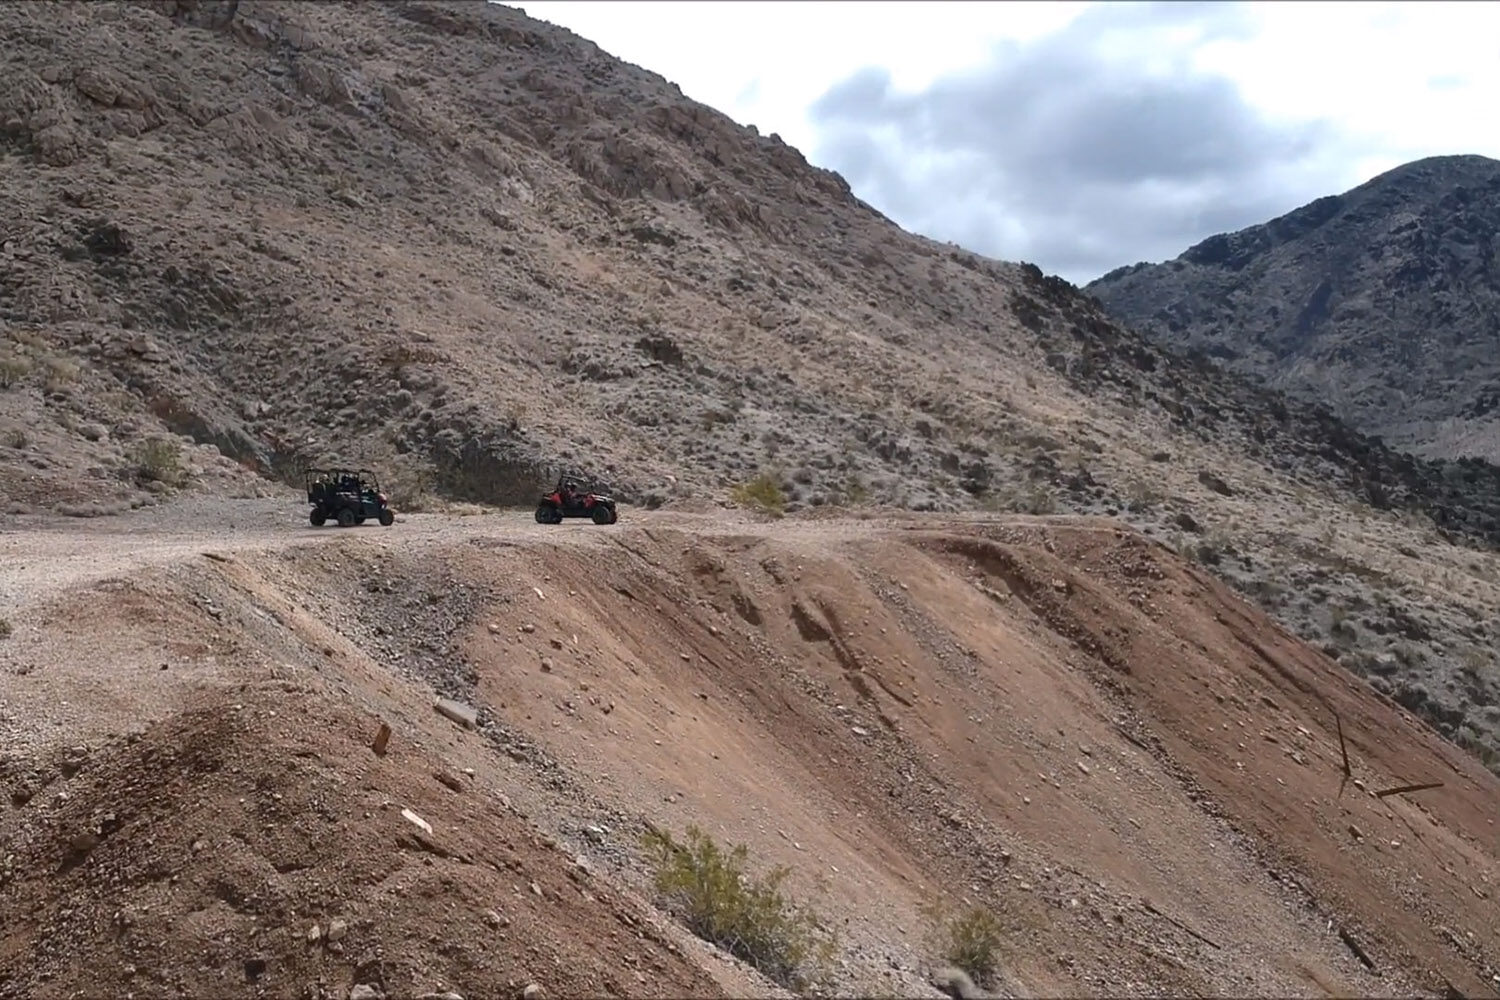 Two ATVs parked on mining tailings